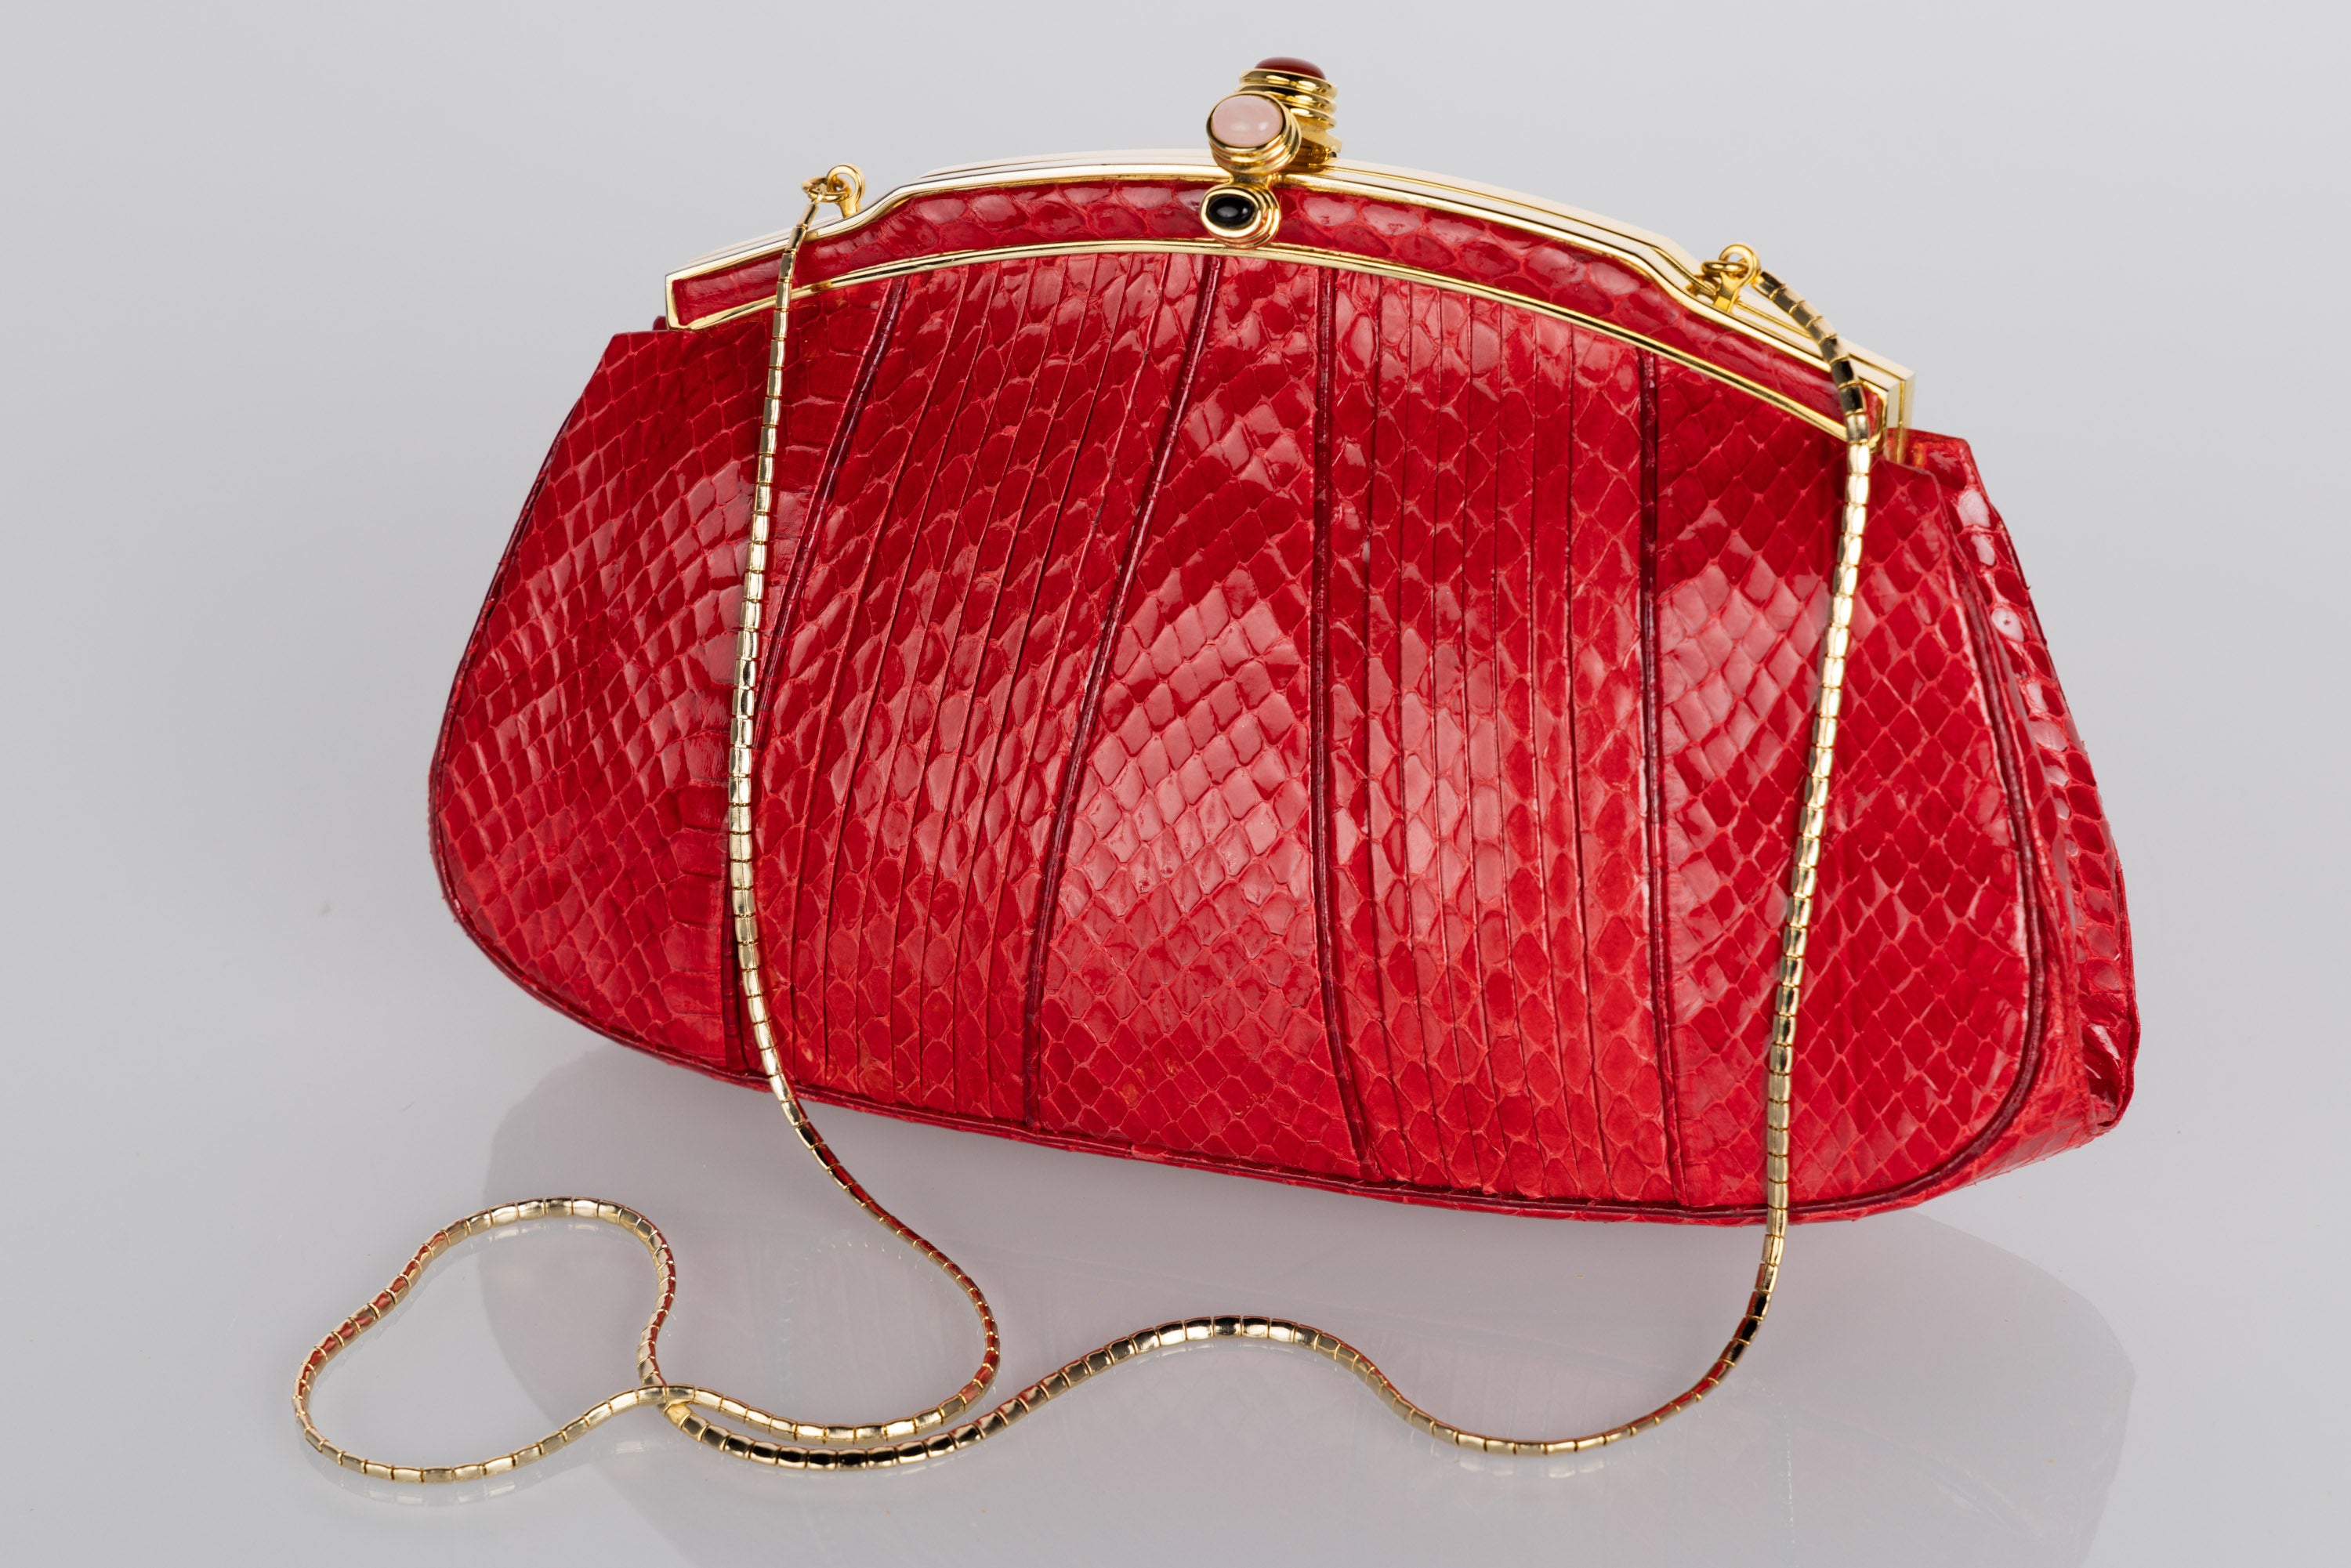 Born in the tumultuous time of the World War decades, Hungarian born Judith Leiber achieved astonishing accomplishments for her work in handbag and leather good design. Being the first woman inducted into the Hungarian Handbag Guild, Leiber’s craft